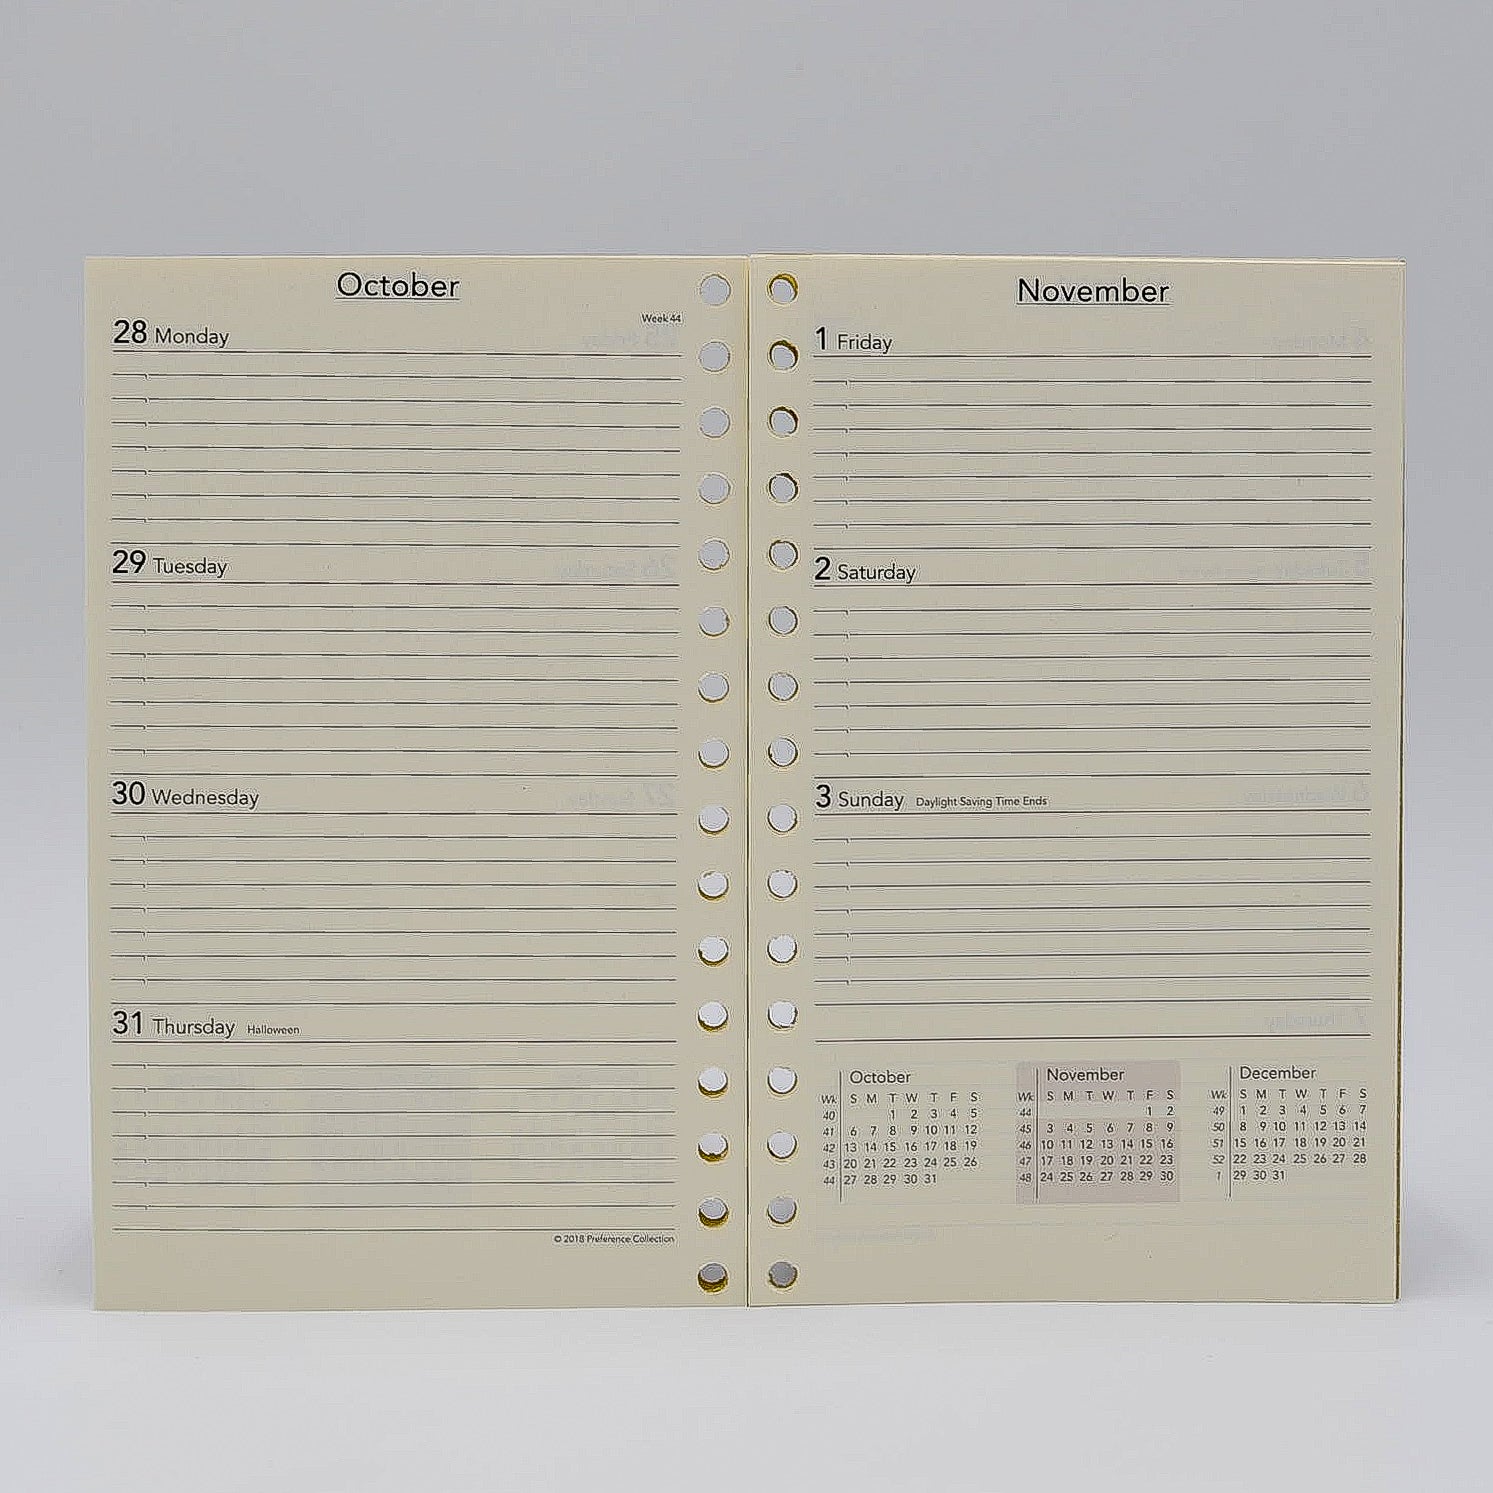 Preference Collection: PD85MI 8 x 5 16-hole Planner sungraphix ivory 16 ring planner calendar agenda organizer desk monthly weekly gherka Bosca loose leaf insert refill paper binder 